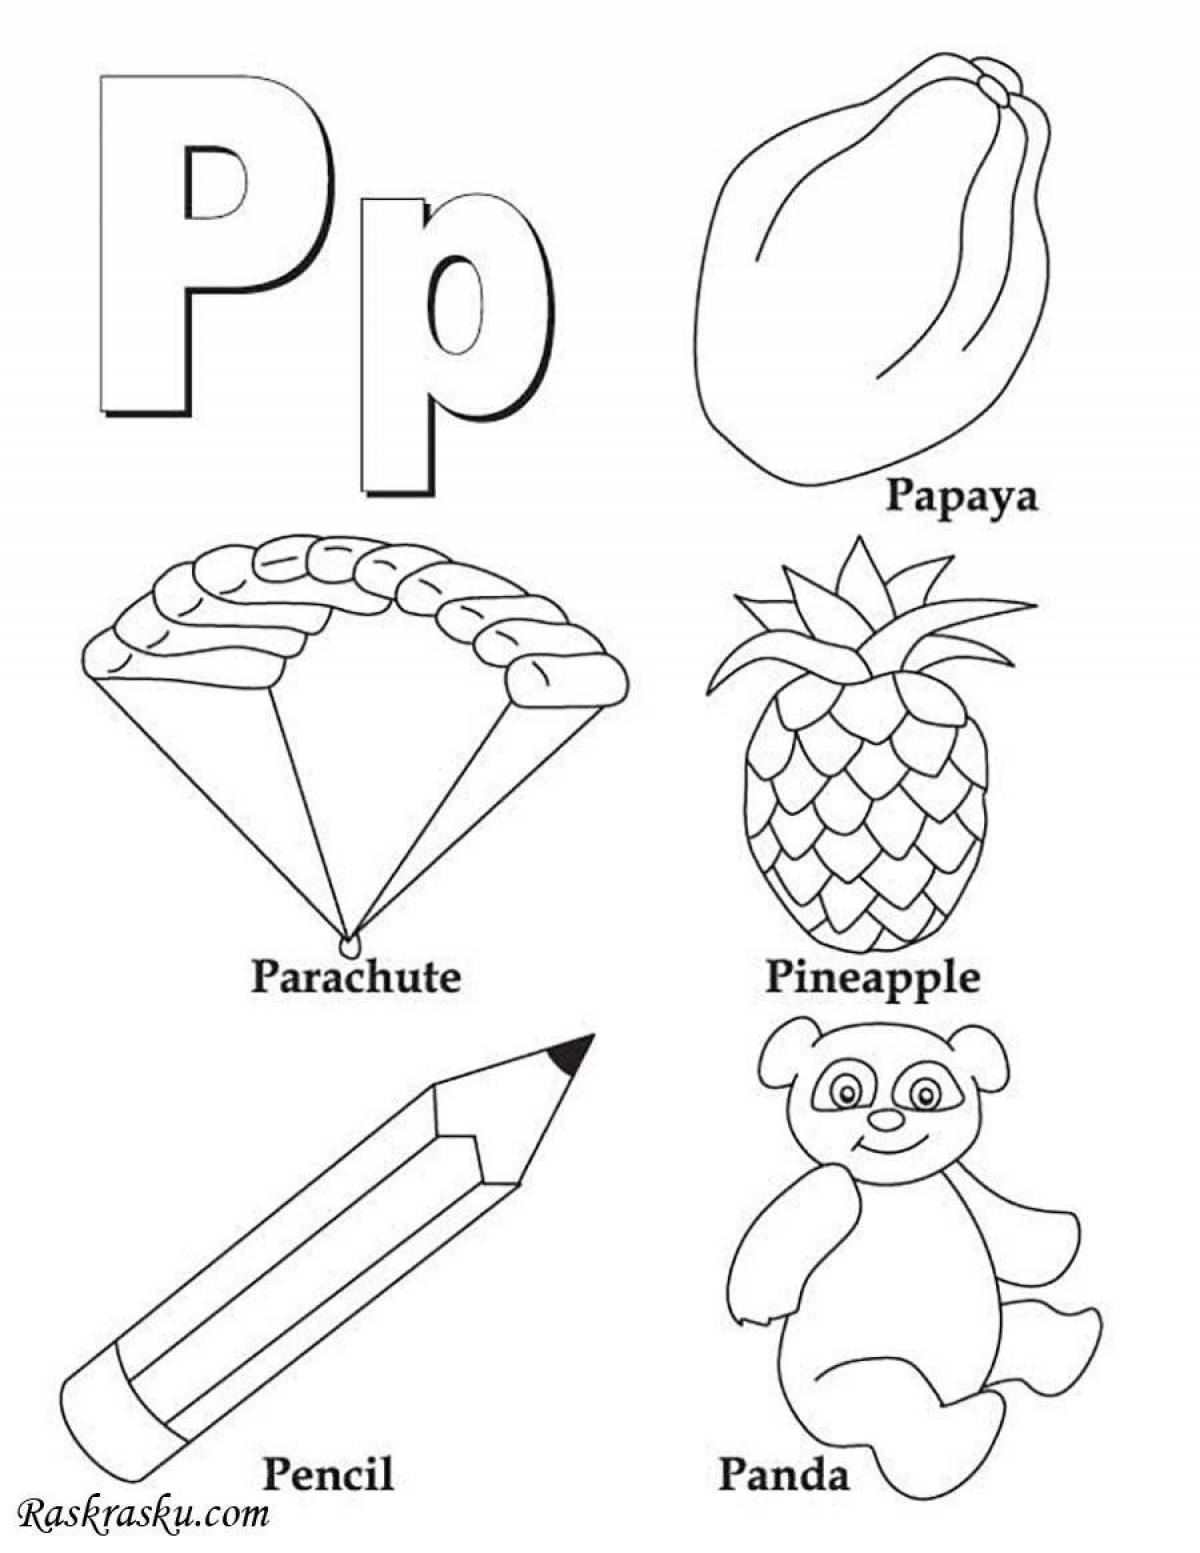 English alphabet in pictures #7